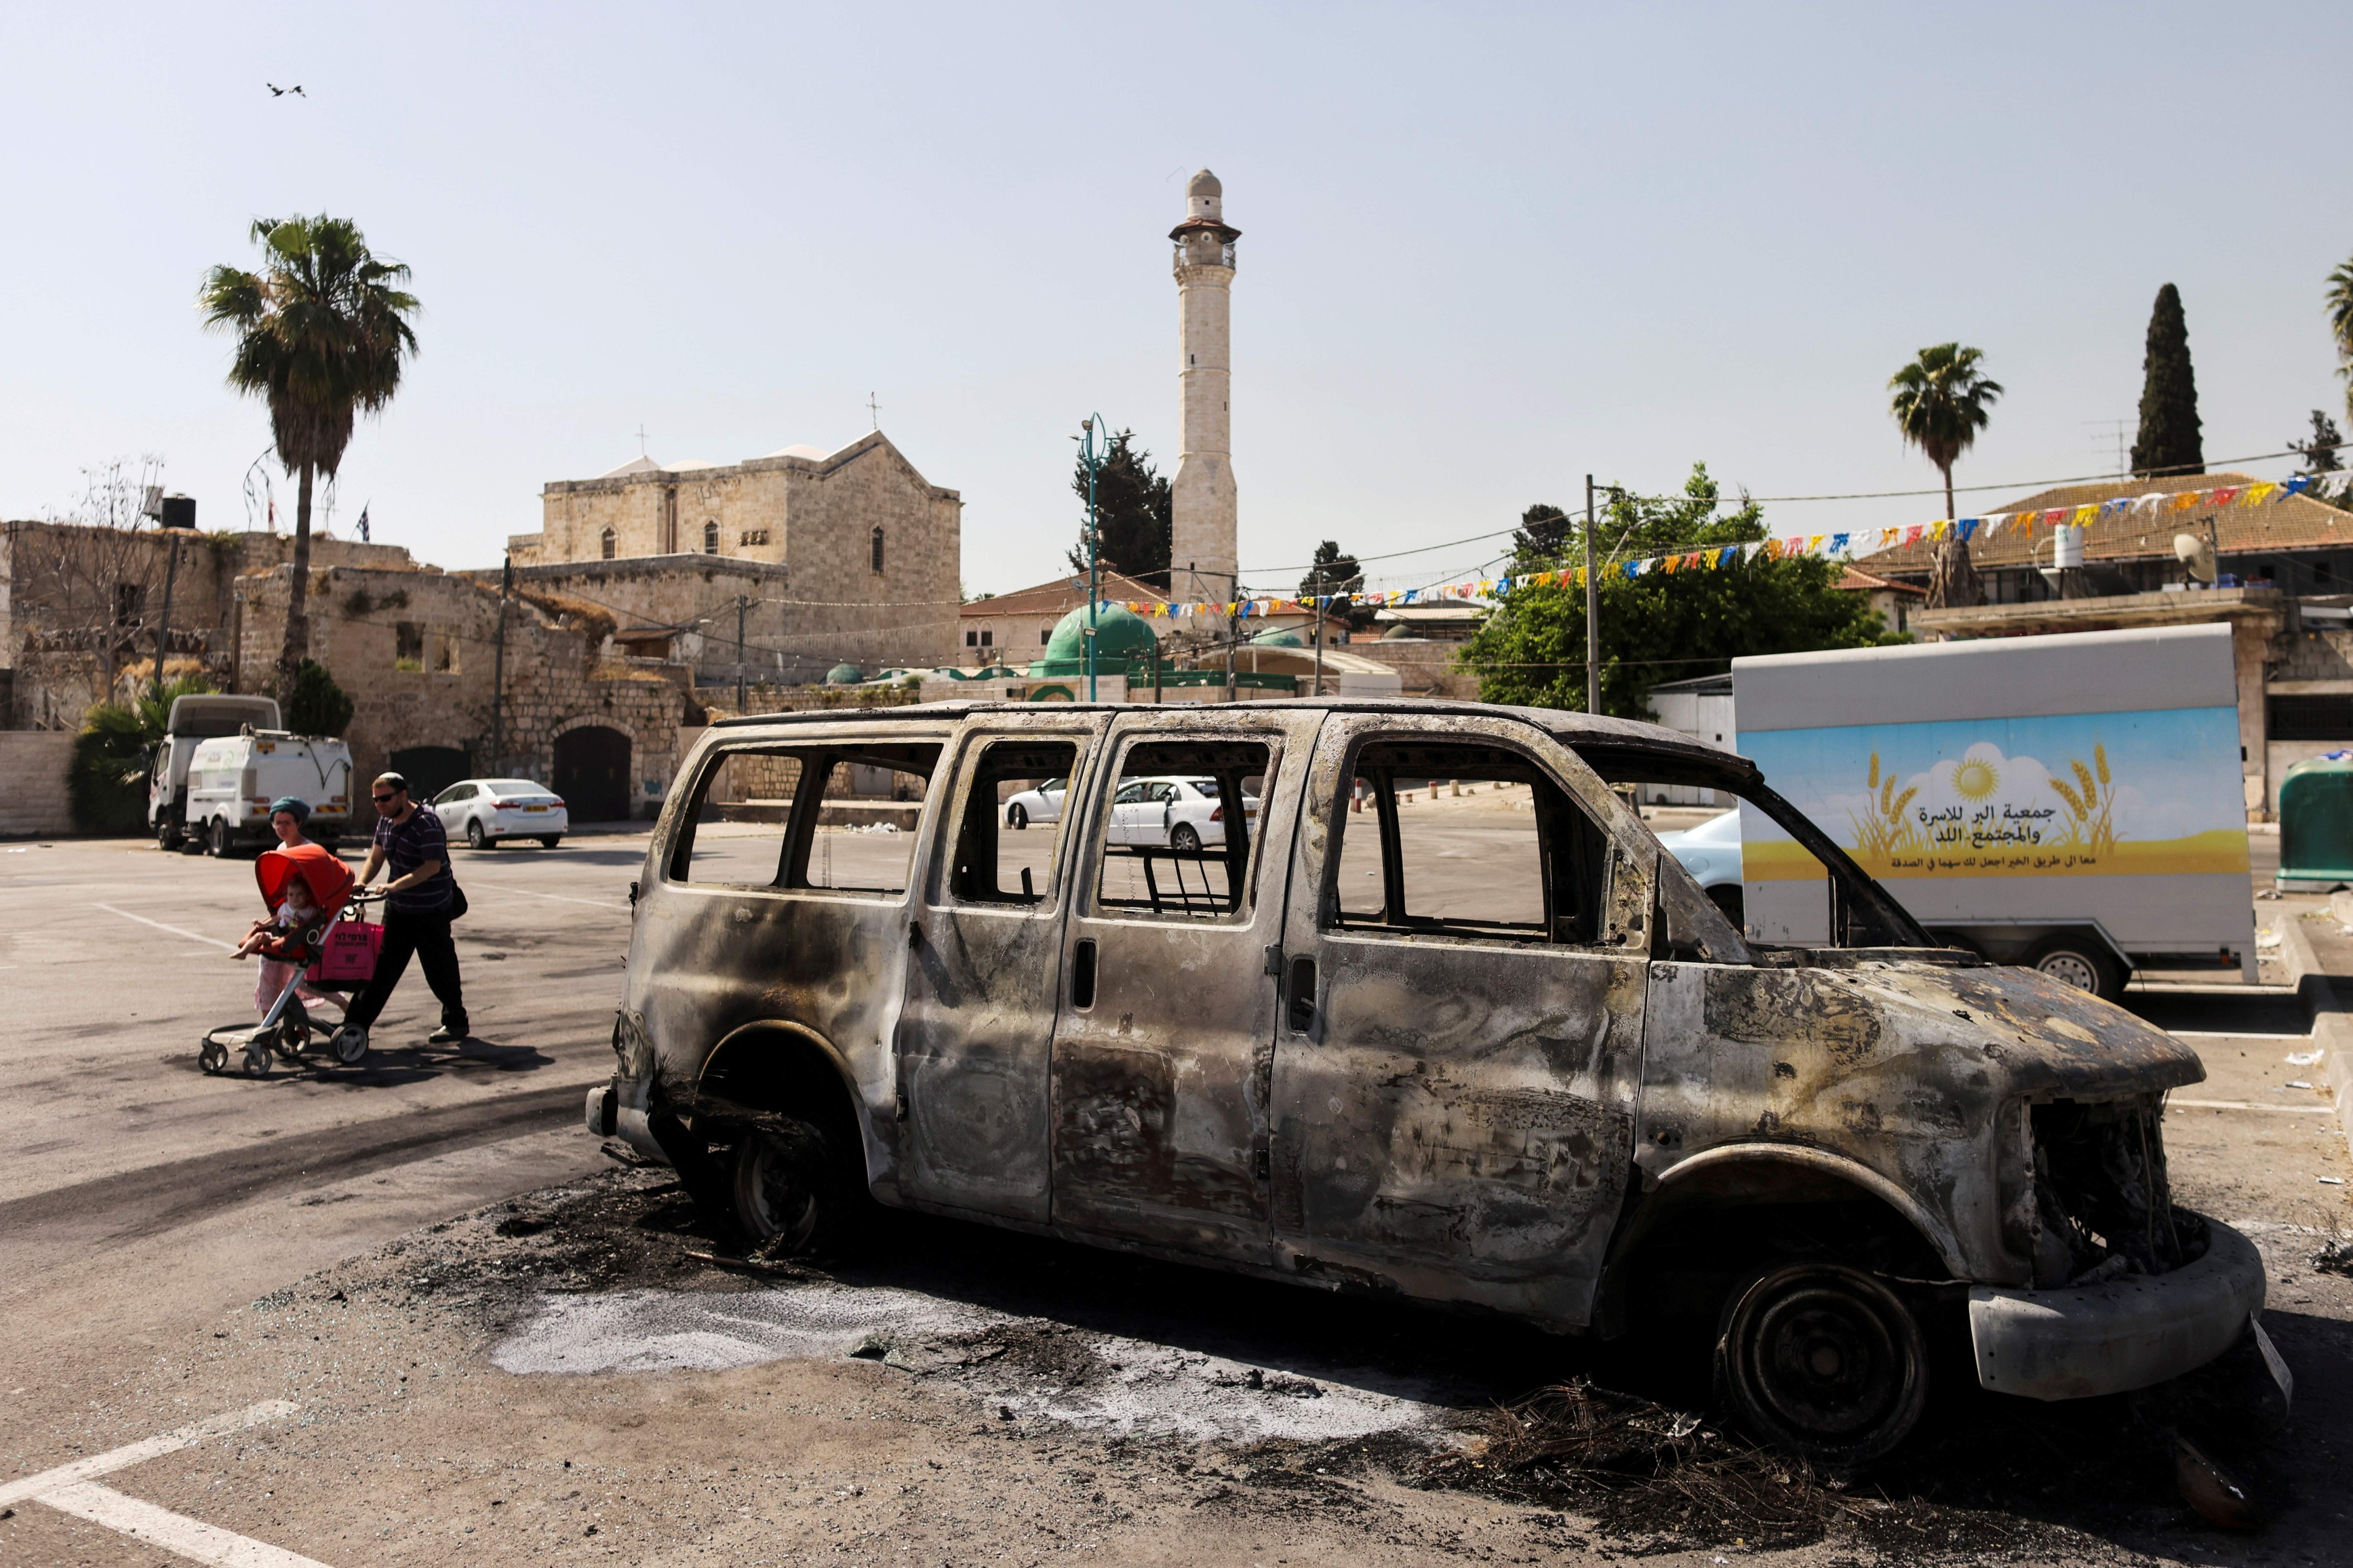 A burnt vehicle is seen outside the Omari Mosque in Lydd after violent riots in 12 May 2021 (Reuters)